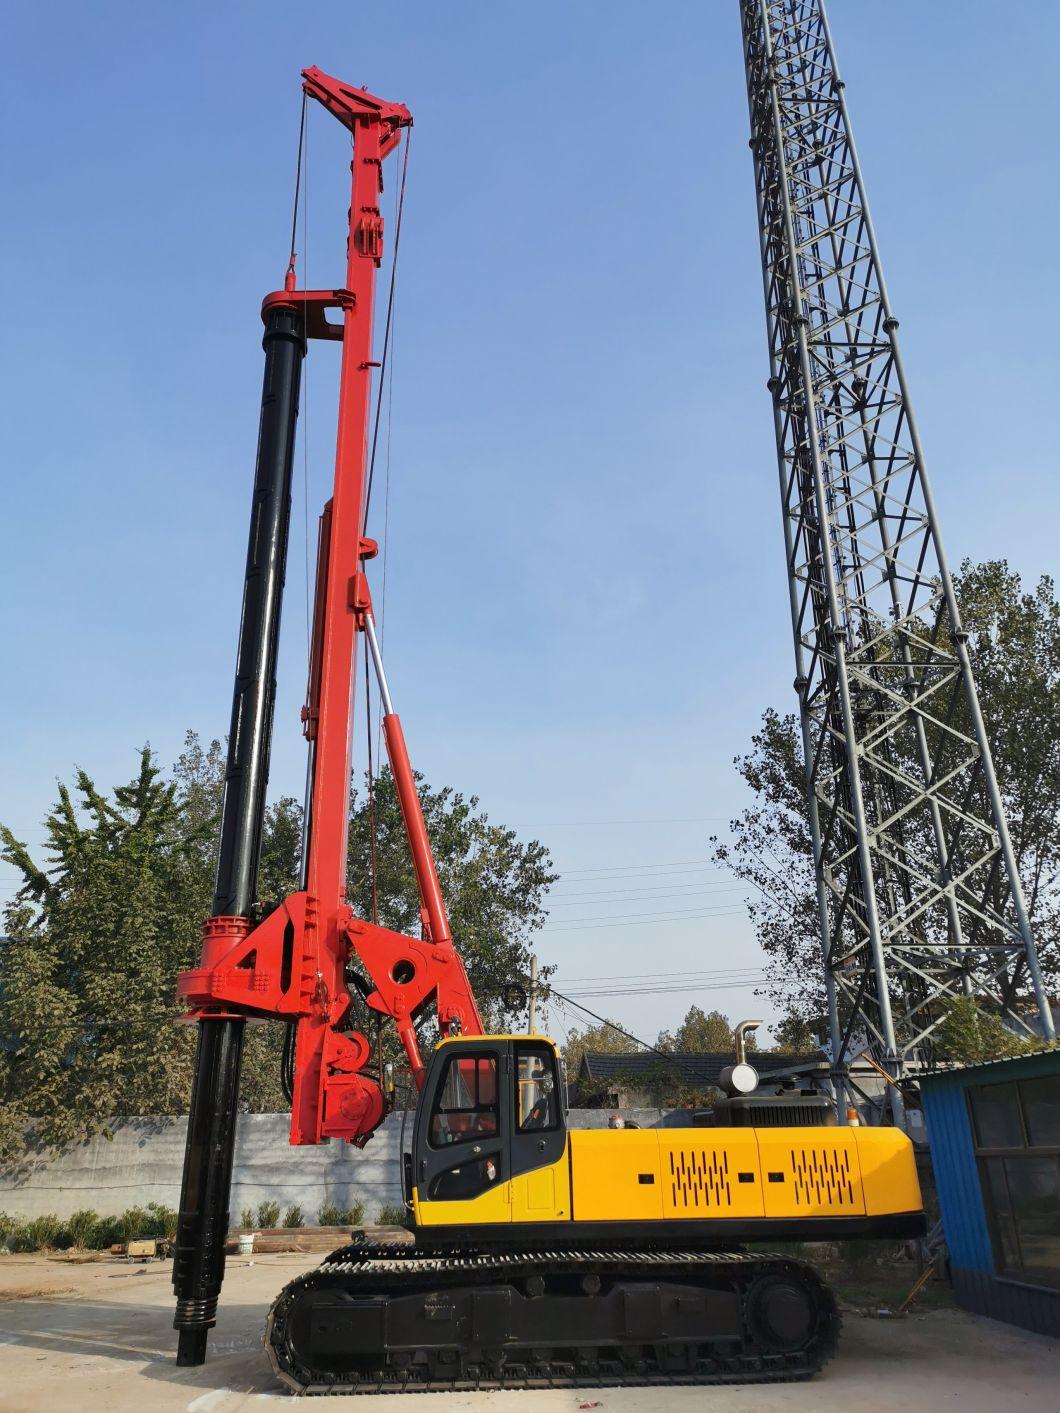 Small Crawler Hydraulic Series Dr-100 Drilling Rig for Pile Foundation/Mining Water Well Drilling Rig/Engineering Construction Equipment